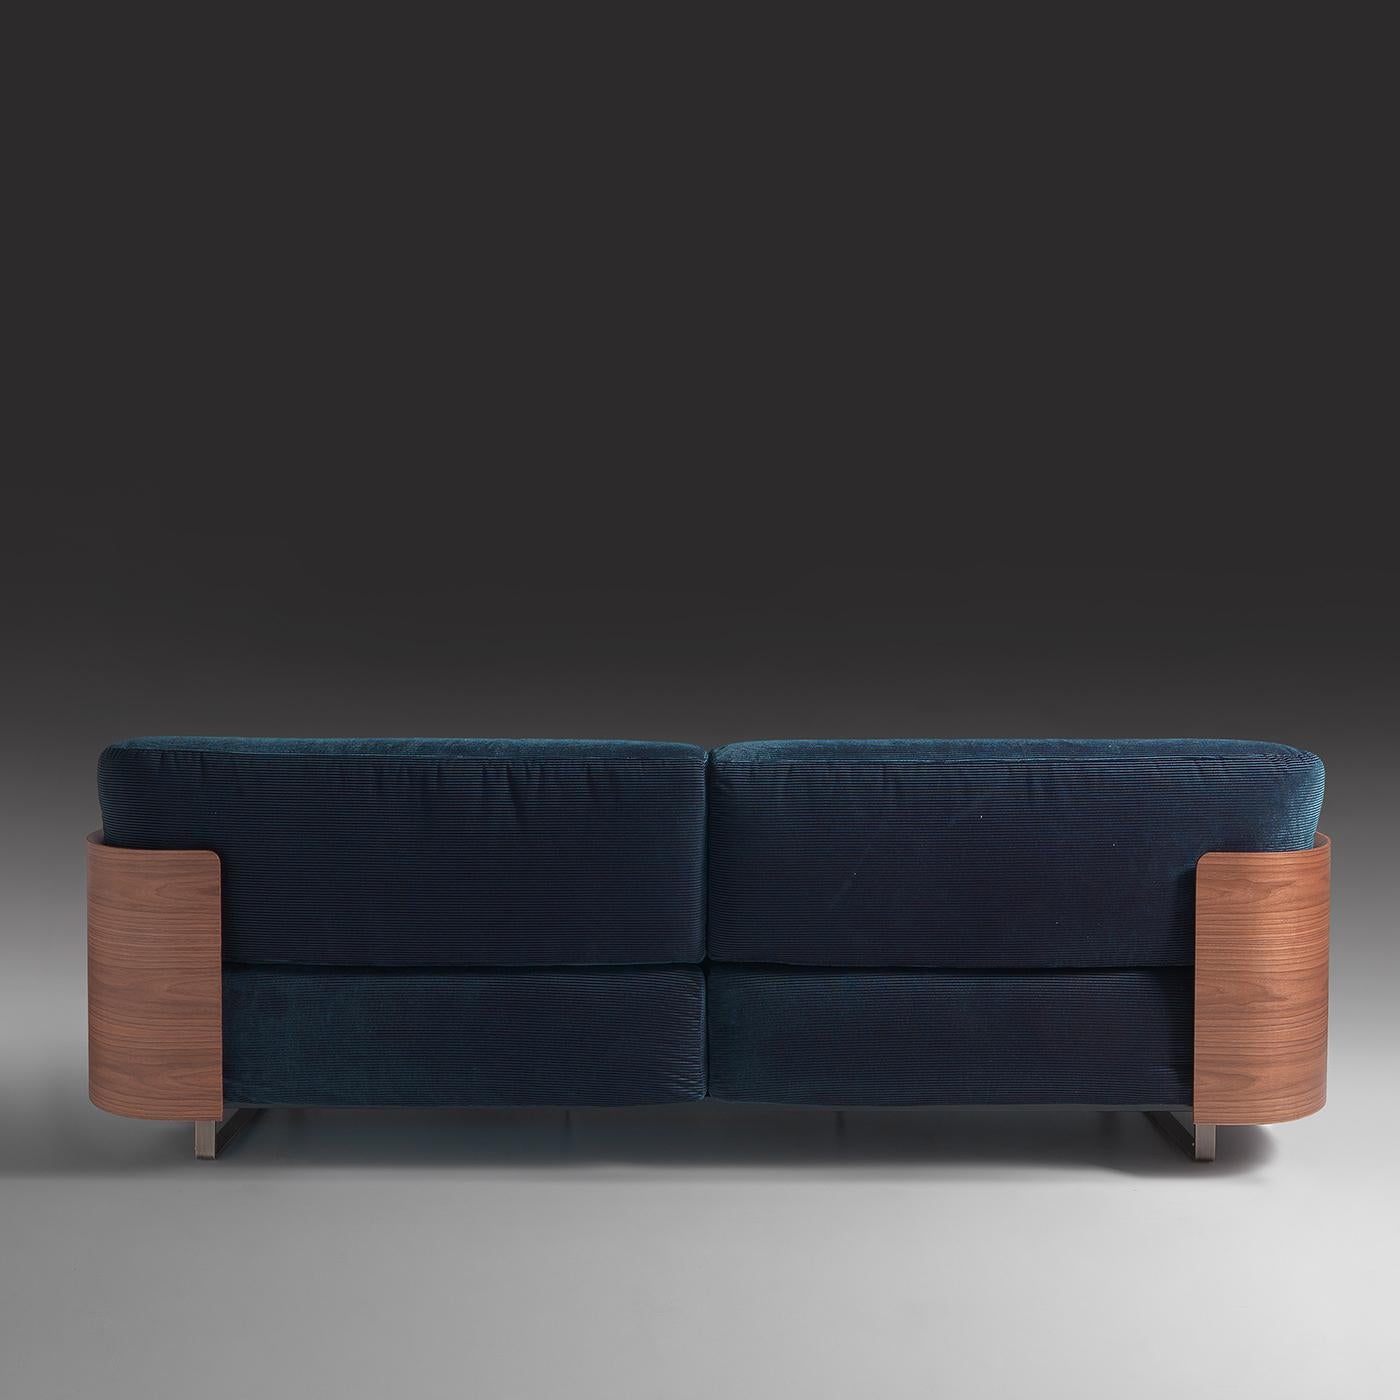 Masterful traditional craftsmanship meets contemporary design in this splendid sofa, handmade of Canaletto walnut wood displaying fully wooden sides. Enriched with two small cylindrical cushions as armrests, it is upholstered with a mesmerizing blue